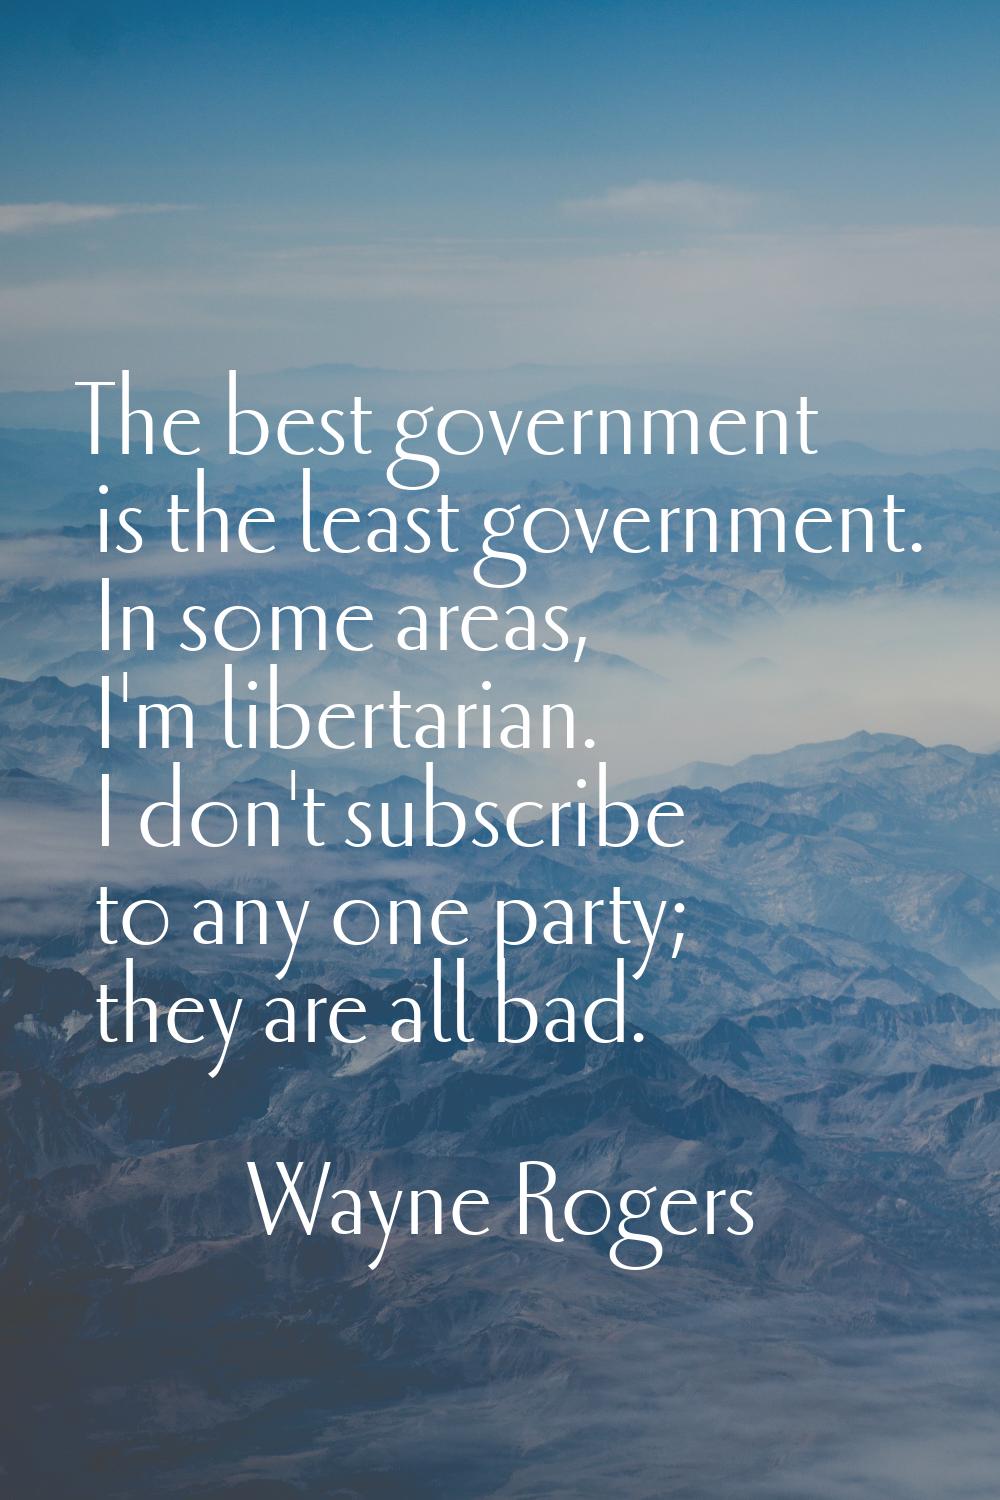 The best government is the least government. In some areas, I'm libertarian. I don't subscribe to a